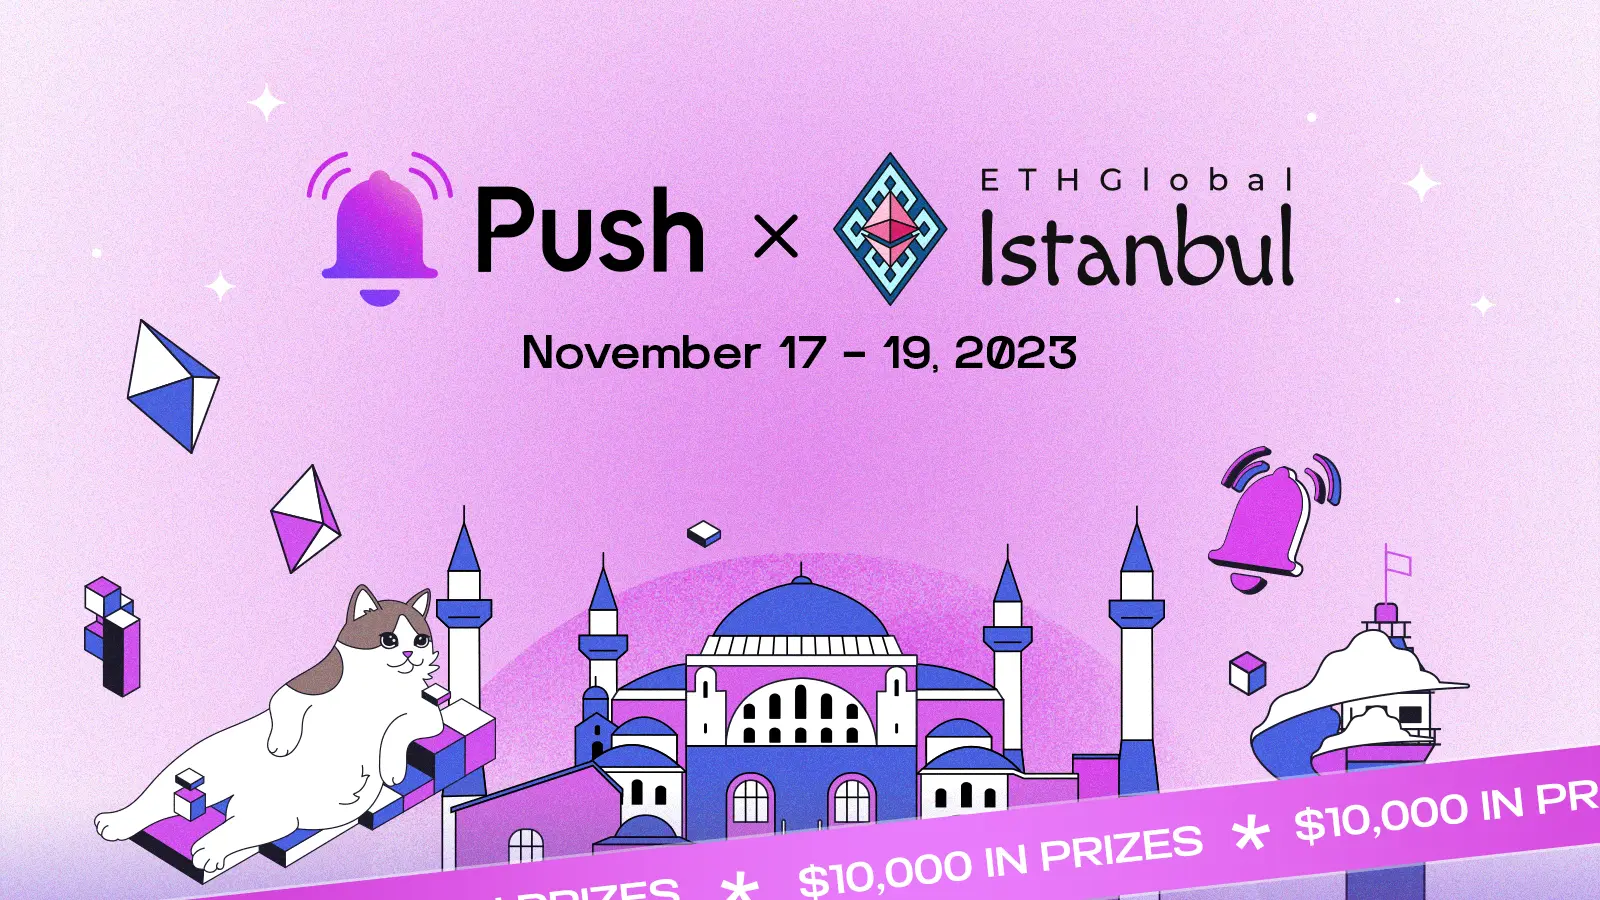 Cover Image of Push x ETHGlobal Istanbul - Enhance Your UX and Win $10k in Bounties